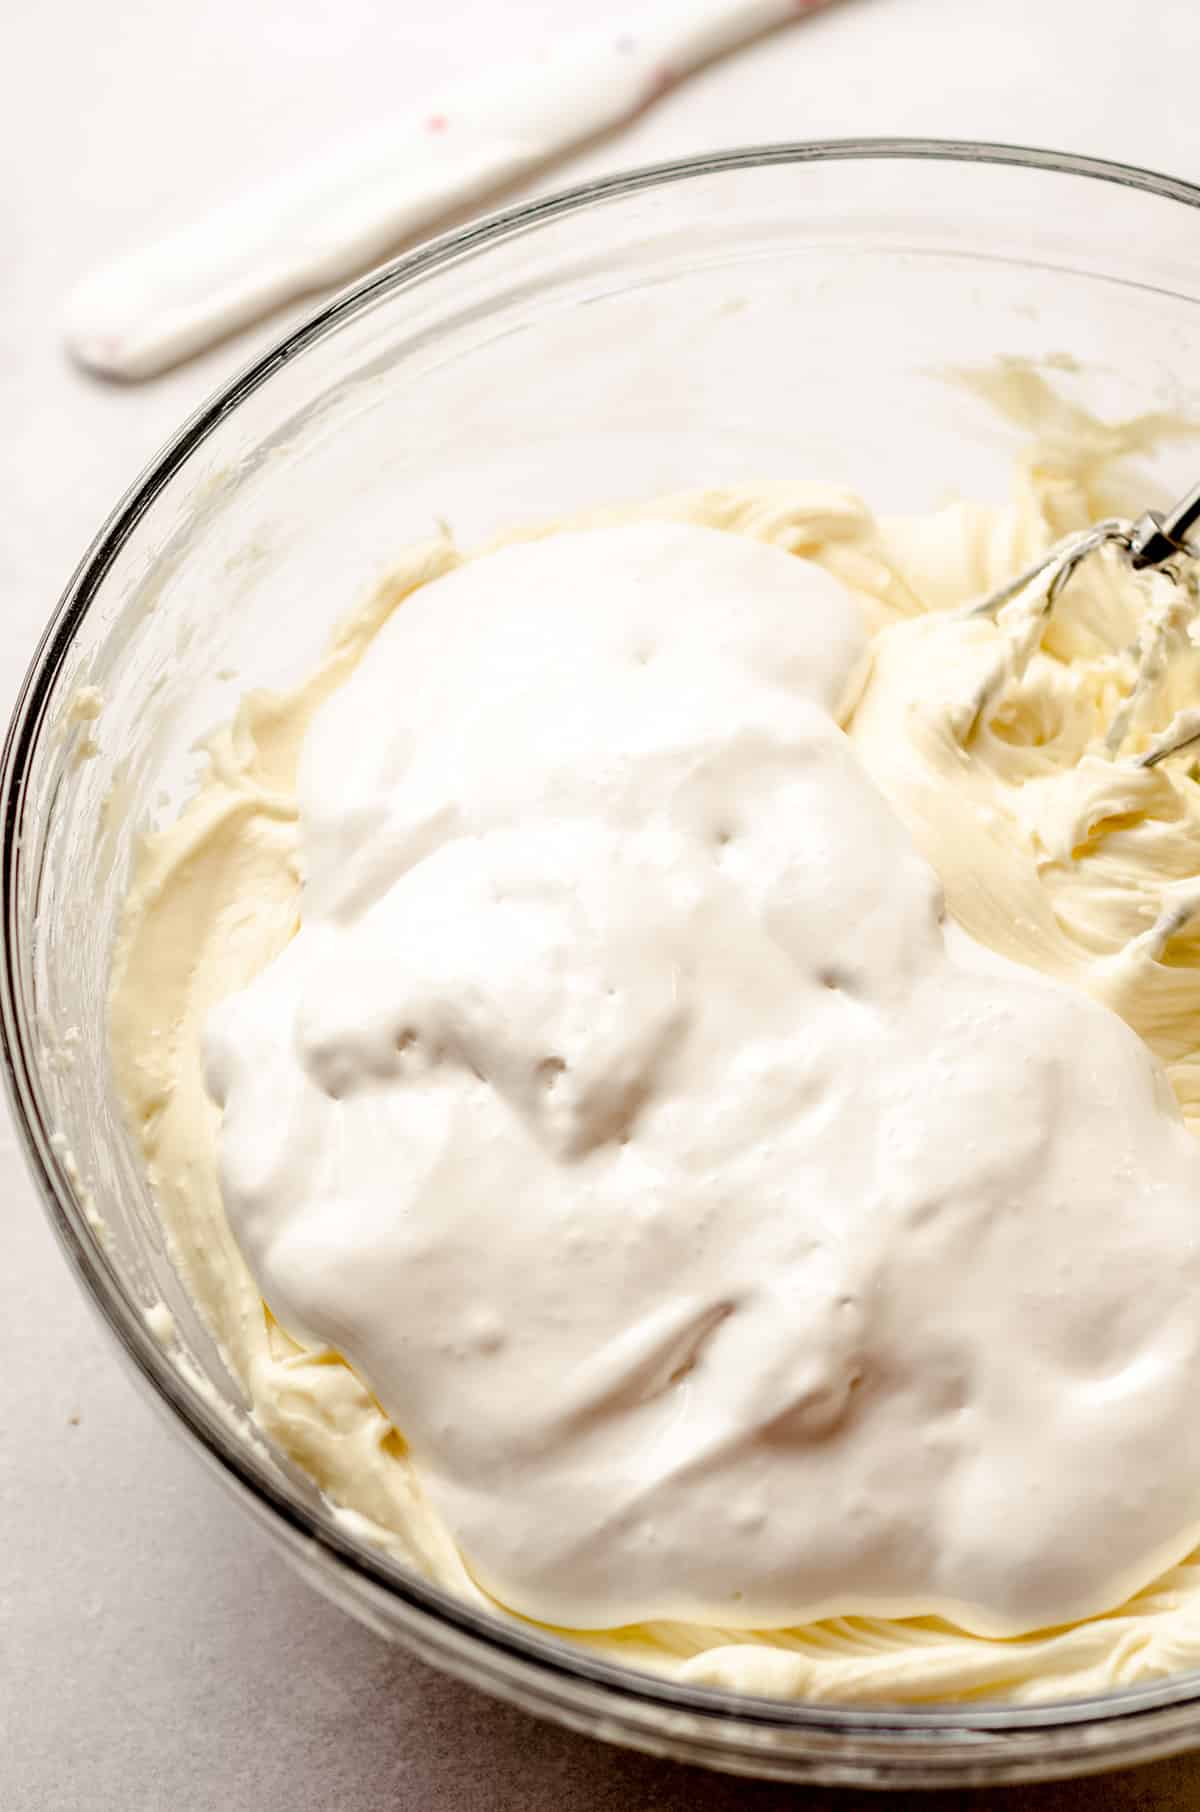 Beating cream cheese and marshmallow creme together.